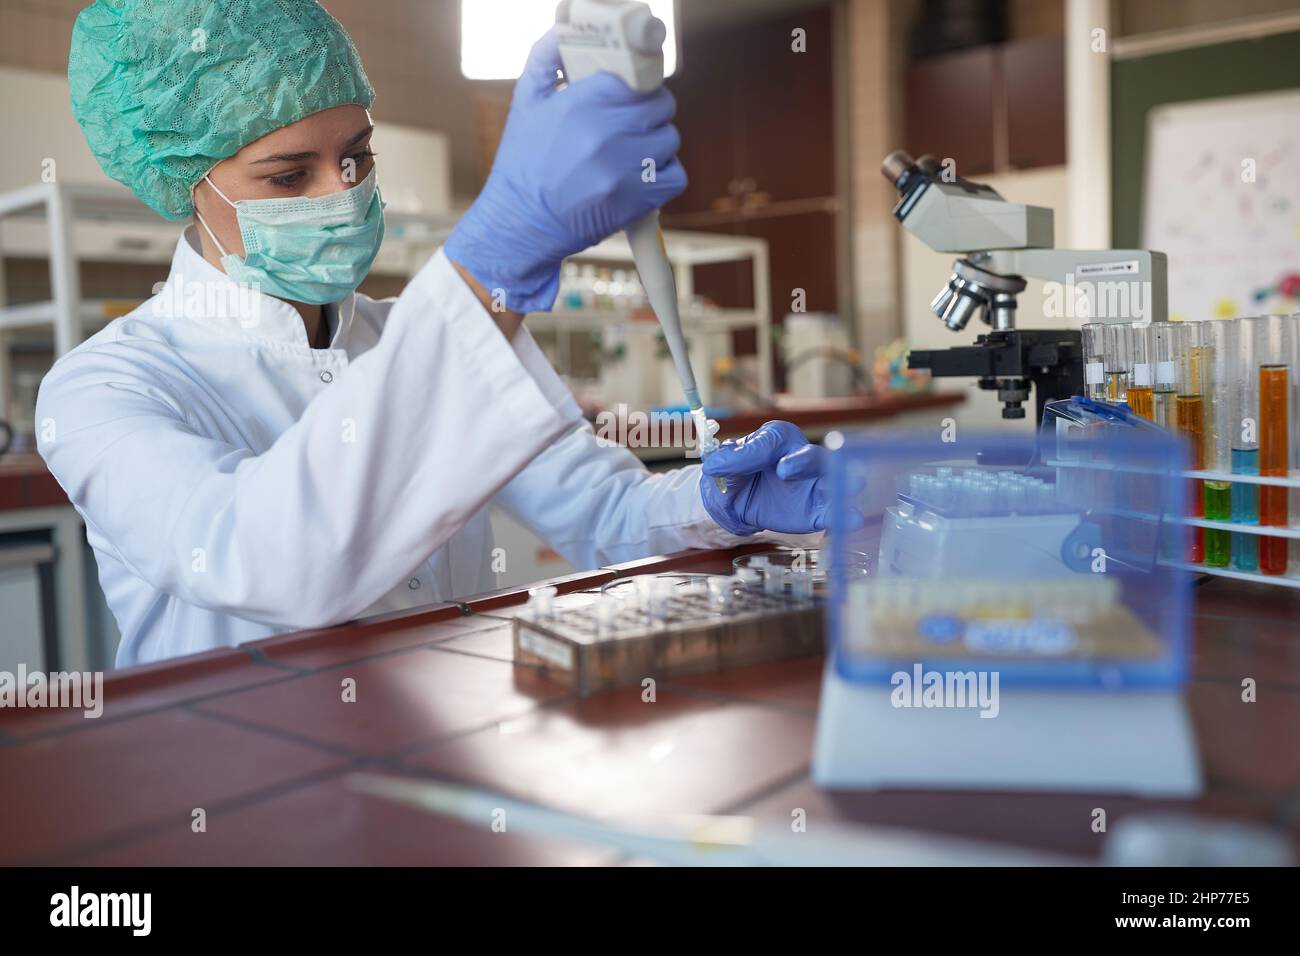 A young female scientist in protective gear taking samples for analysis in a sterile laboratory environment. Science, chemistry, lab, people Stock Photo